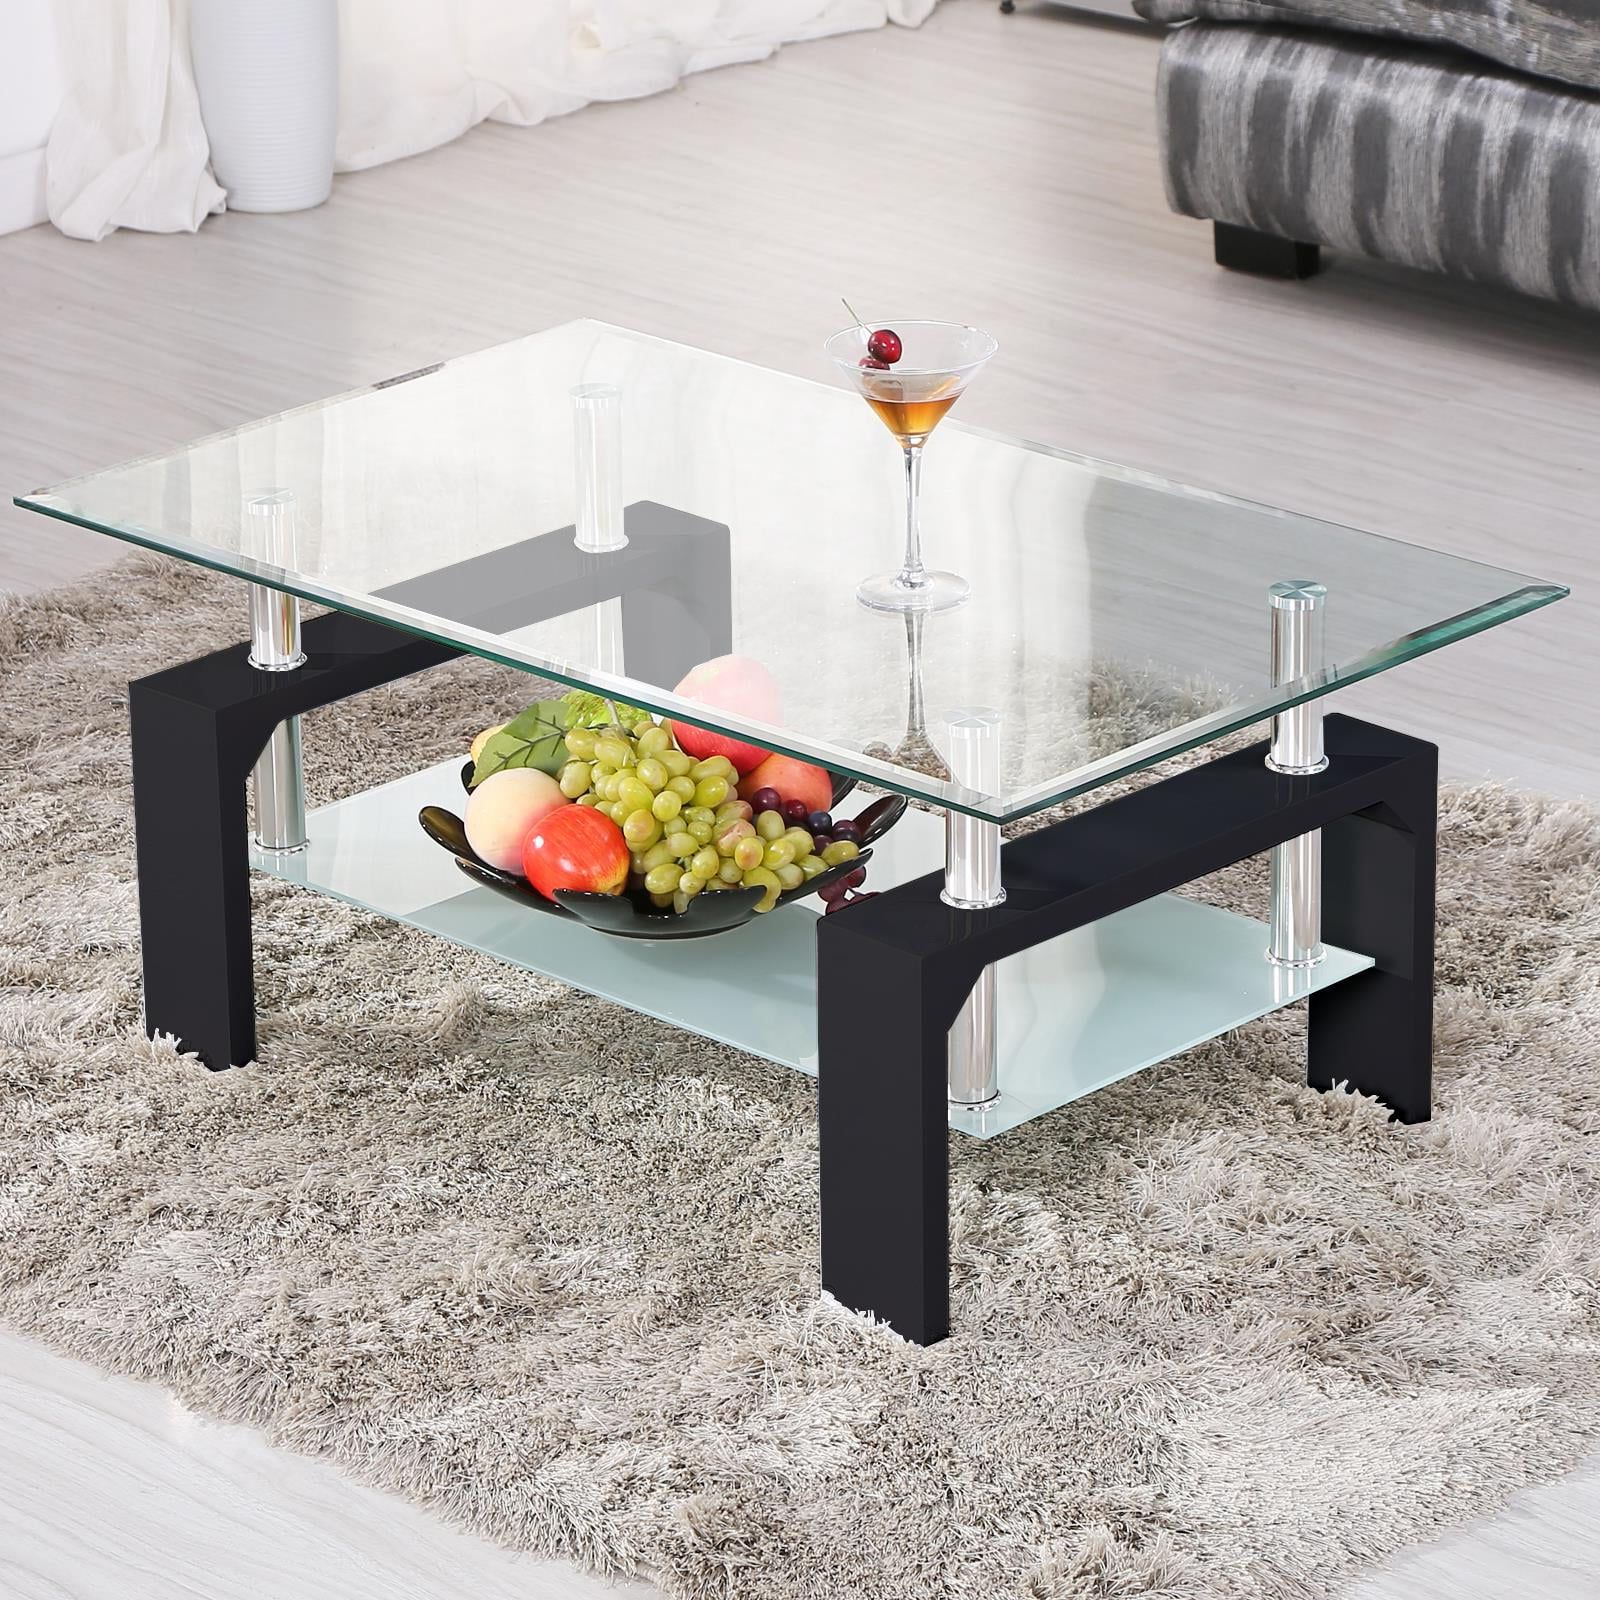 2020 Ktaxon Rectangular Glass Coffee Table Shelf Wood Living Room Furniture Throughout Wood Tempered Glass Top Coffee Tables (Photo 12 of 15)